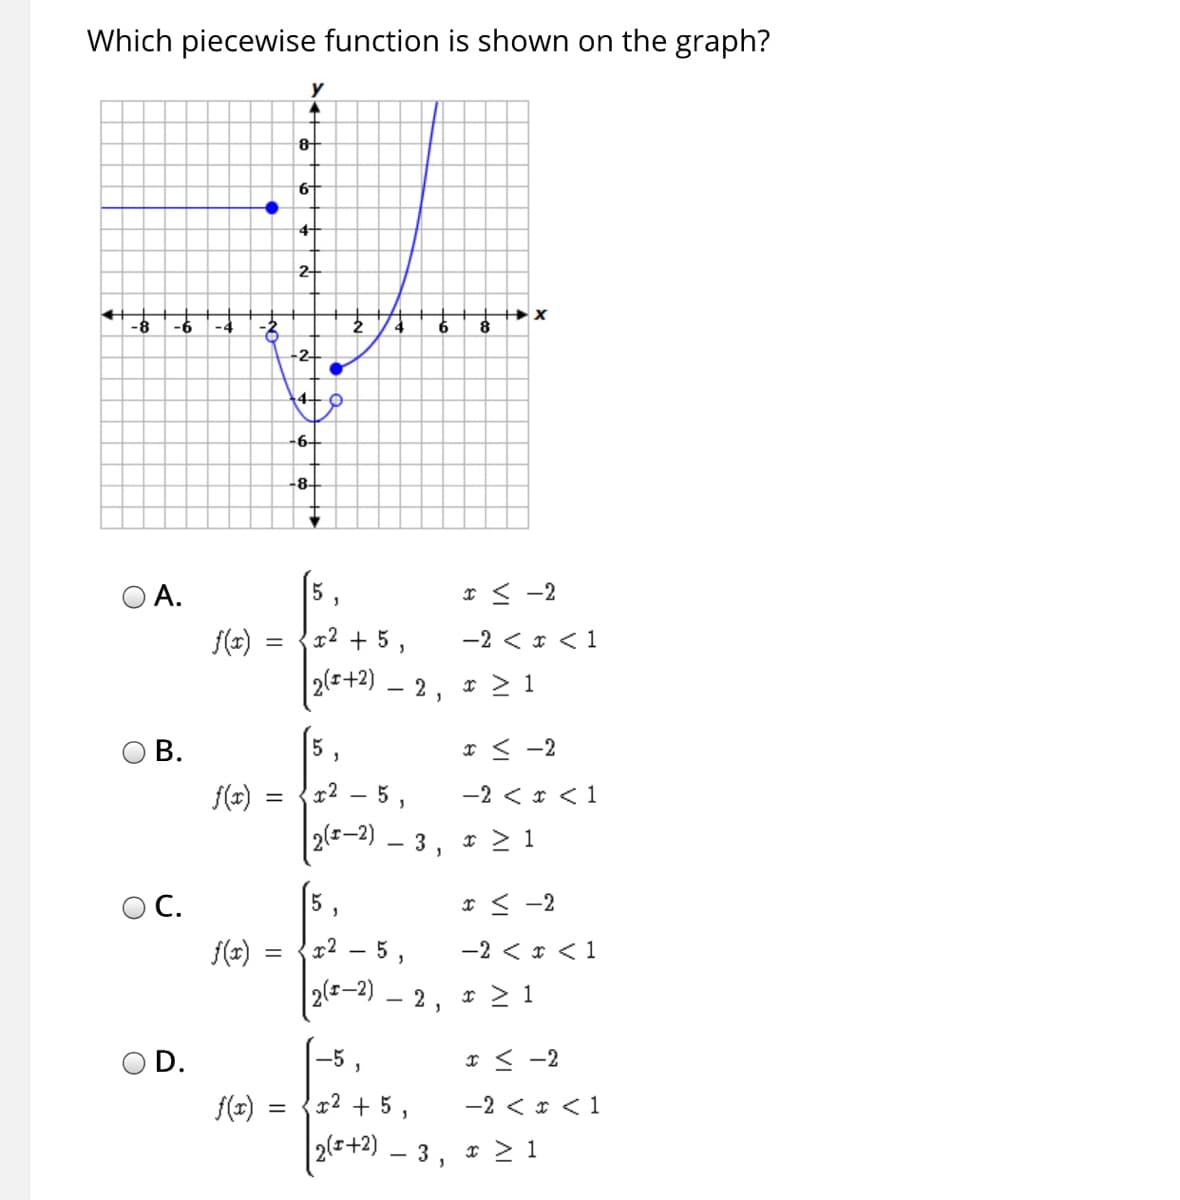 Which piecewise function is shown on the graph?
8
4+
2-
-8
-6
-2-
4+
-6+
-8-
OA.
5,
I < -2
f(x)
r2 + 5 ,
-2 < r < 1
%3|
|2(s+2) – 2 ,
* > 1
В.
5 ,
I < -2
r2 – 5,
f(=)
|2(==2)
-2 < r < 1
- 3
OC.
5 ,
r < -2
2 – 5,
-2 < r <1
2(-2) – 2, * > 1
D.
-5,
I < -2
f(x) =
12 + 5 ,
-2 < * < 1
2(1+2)
* > 1
- 3 ,
2.
